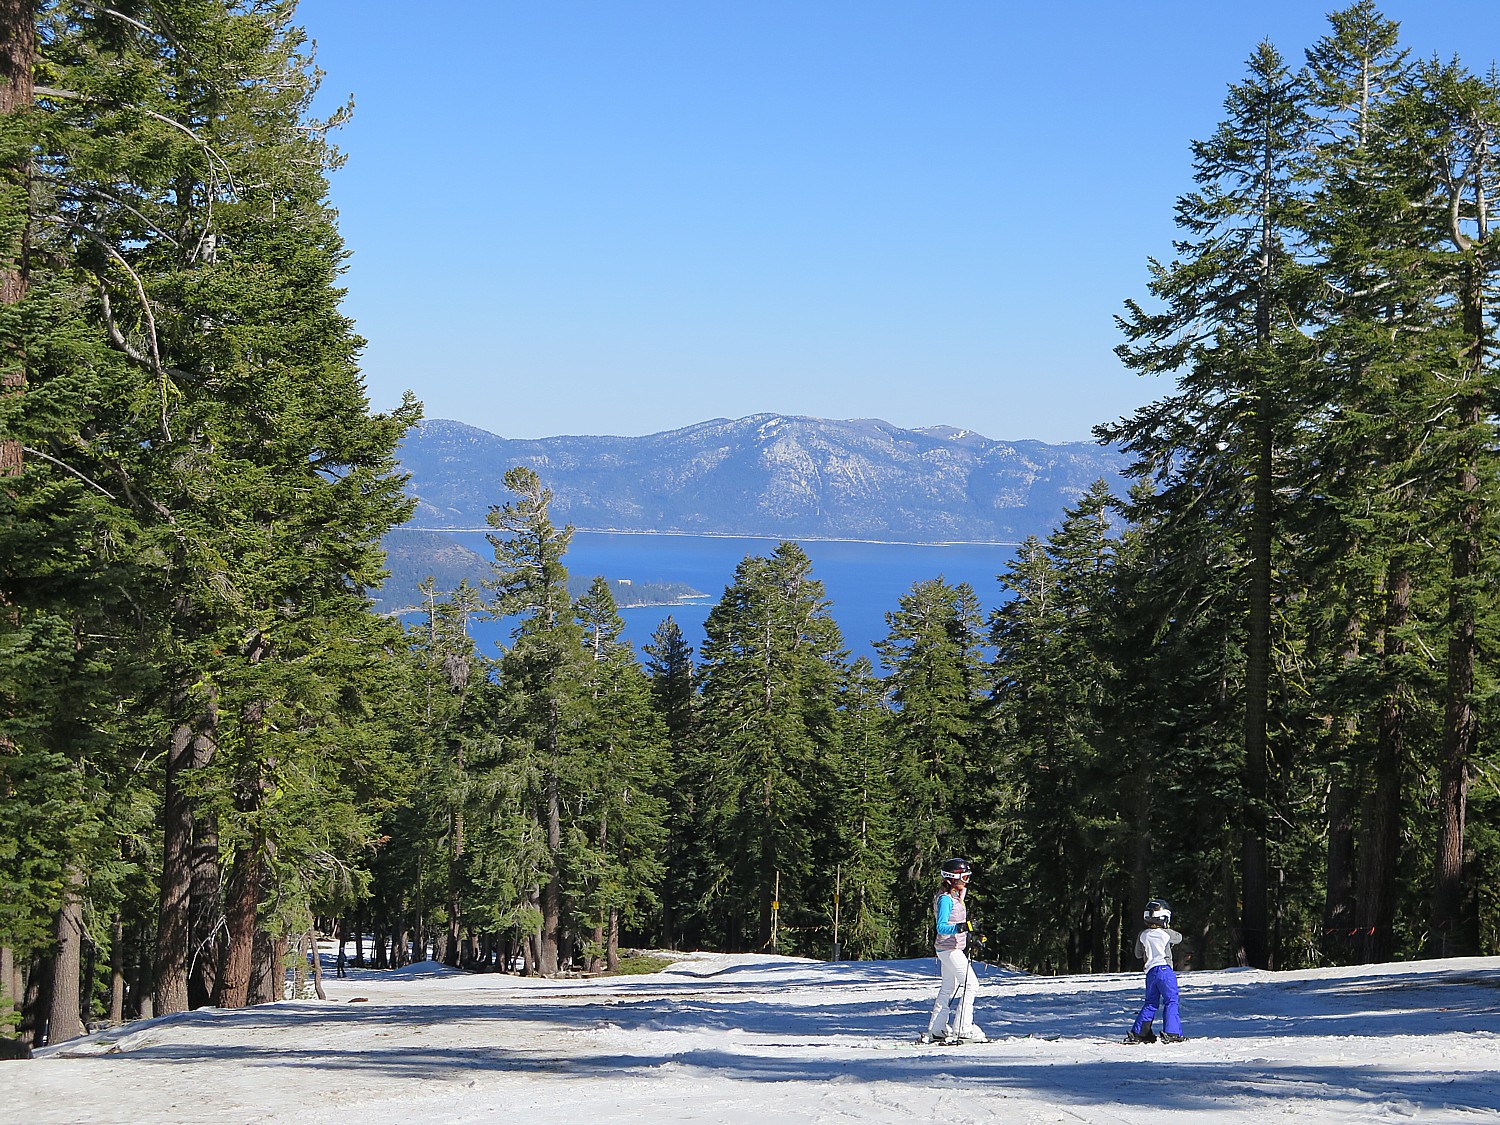 The stunning view of Lake Tahoe from East Ridge trail at Northstar California. The snow conditions were remarkable even at the end of the season, despite California's drought and warm temps. © 2015 Karen Rubin/news-photos-features.com